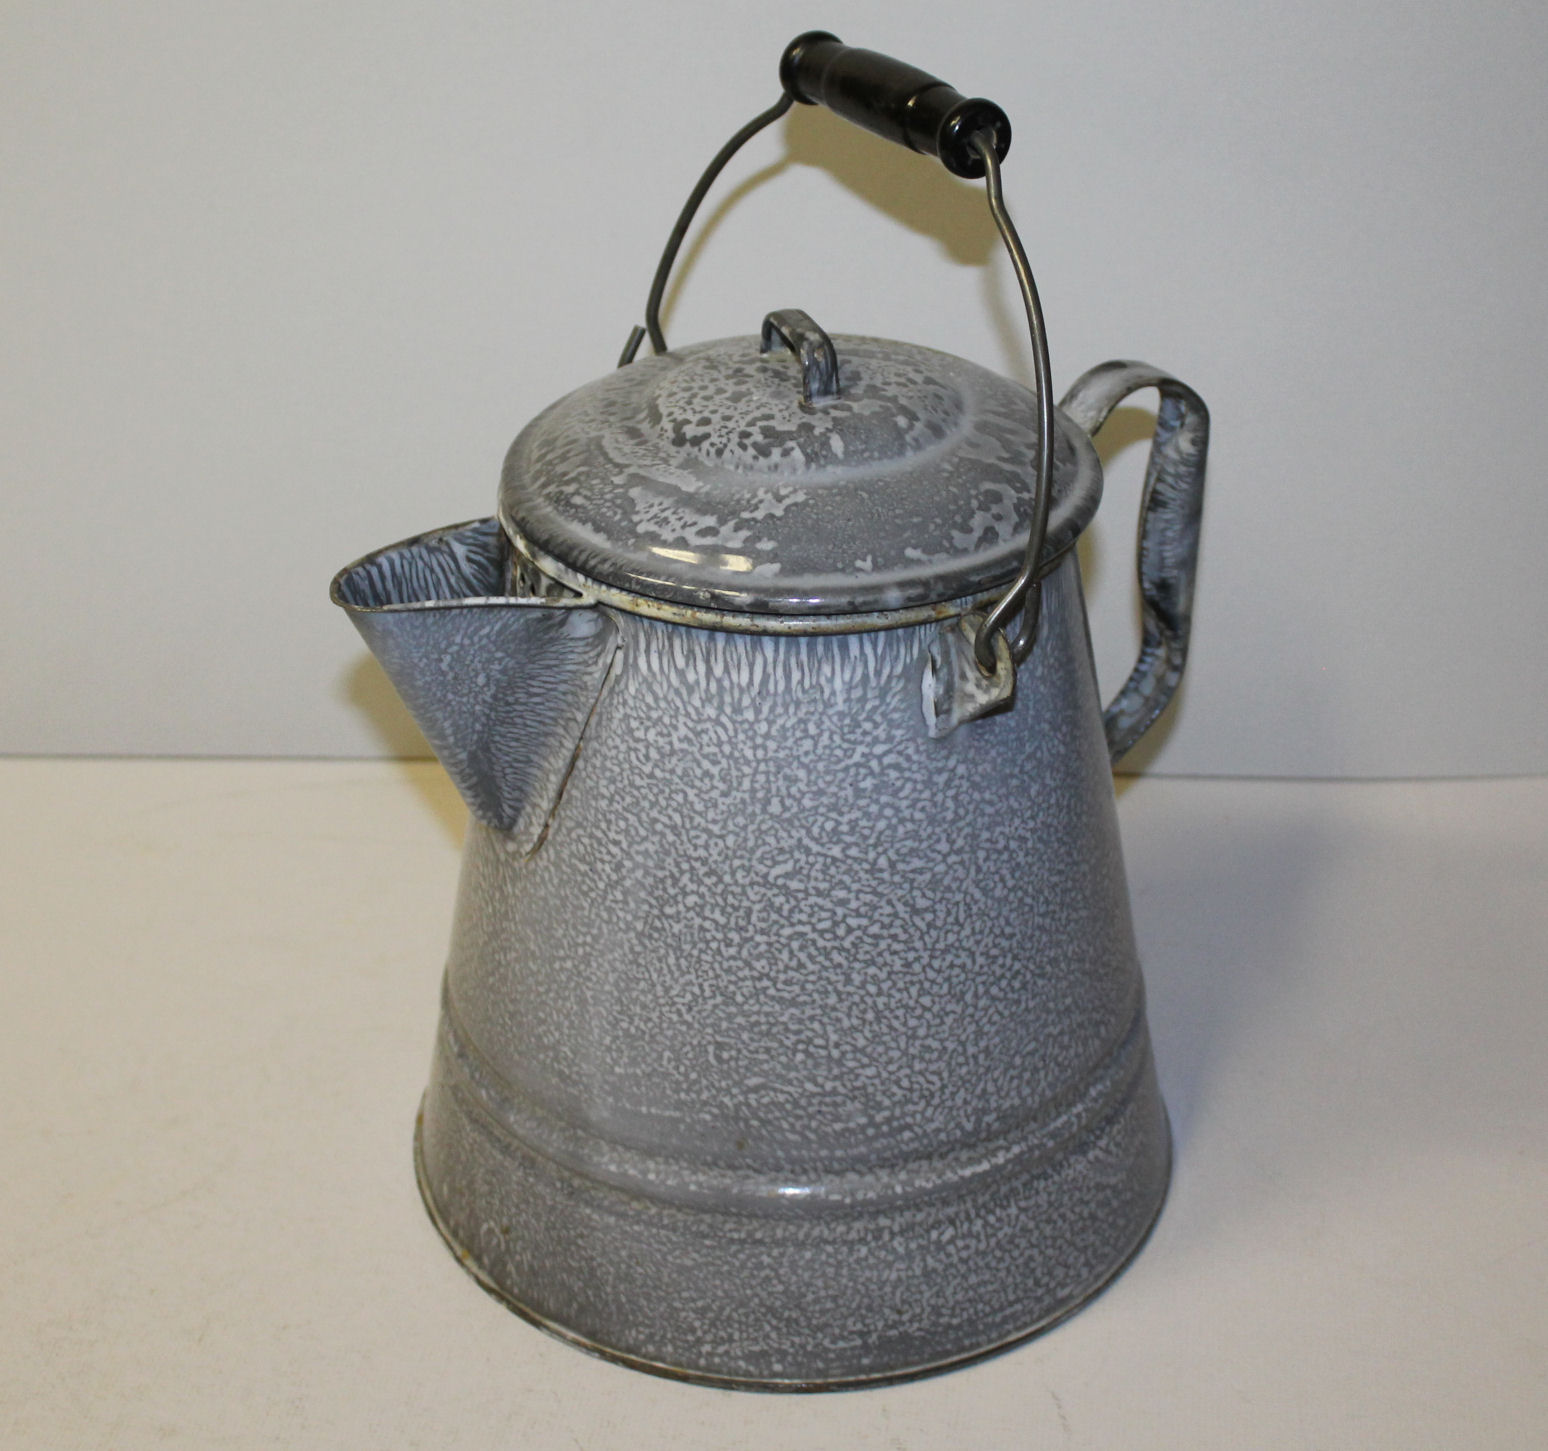 Bargain John's Antiques  Antique Large Gray Graniteware Cowboy Coffee Pot  with Wire Bail Handle - Bargain John's Antiques